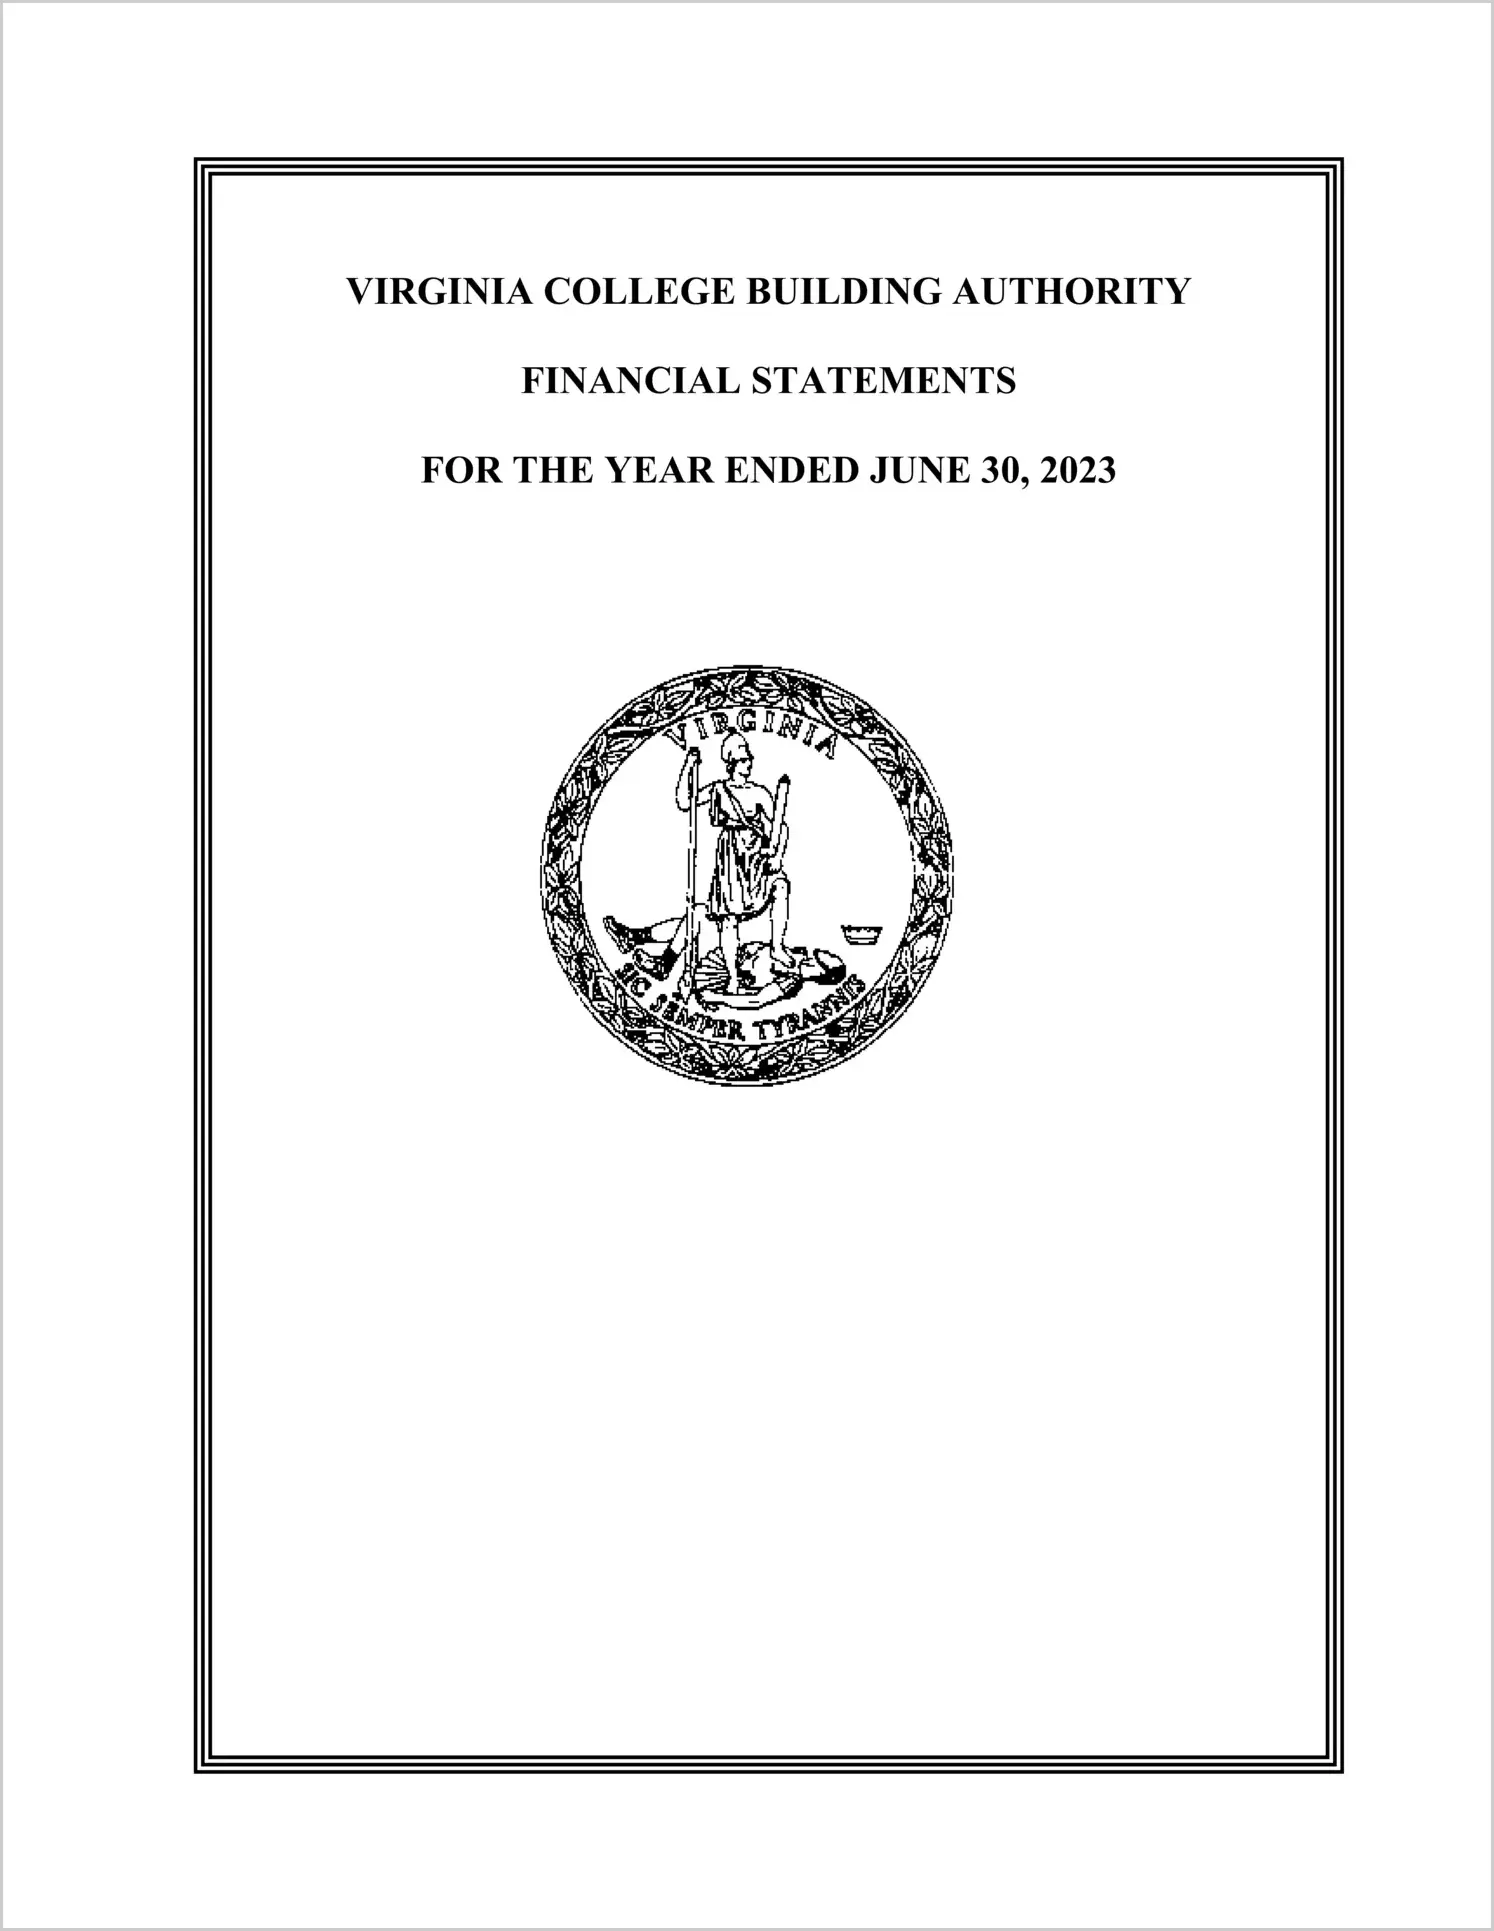 Virginia College Building Authority Financial Statements for the year ended June 30, 2023